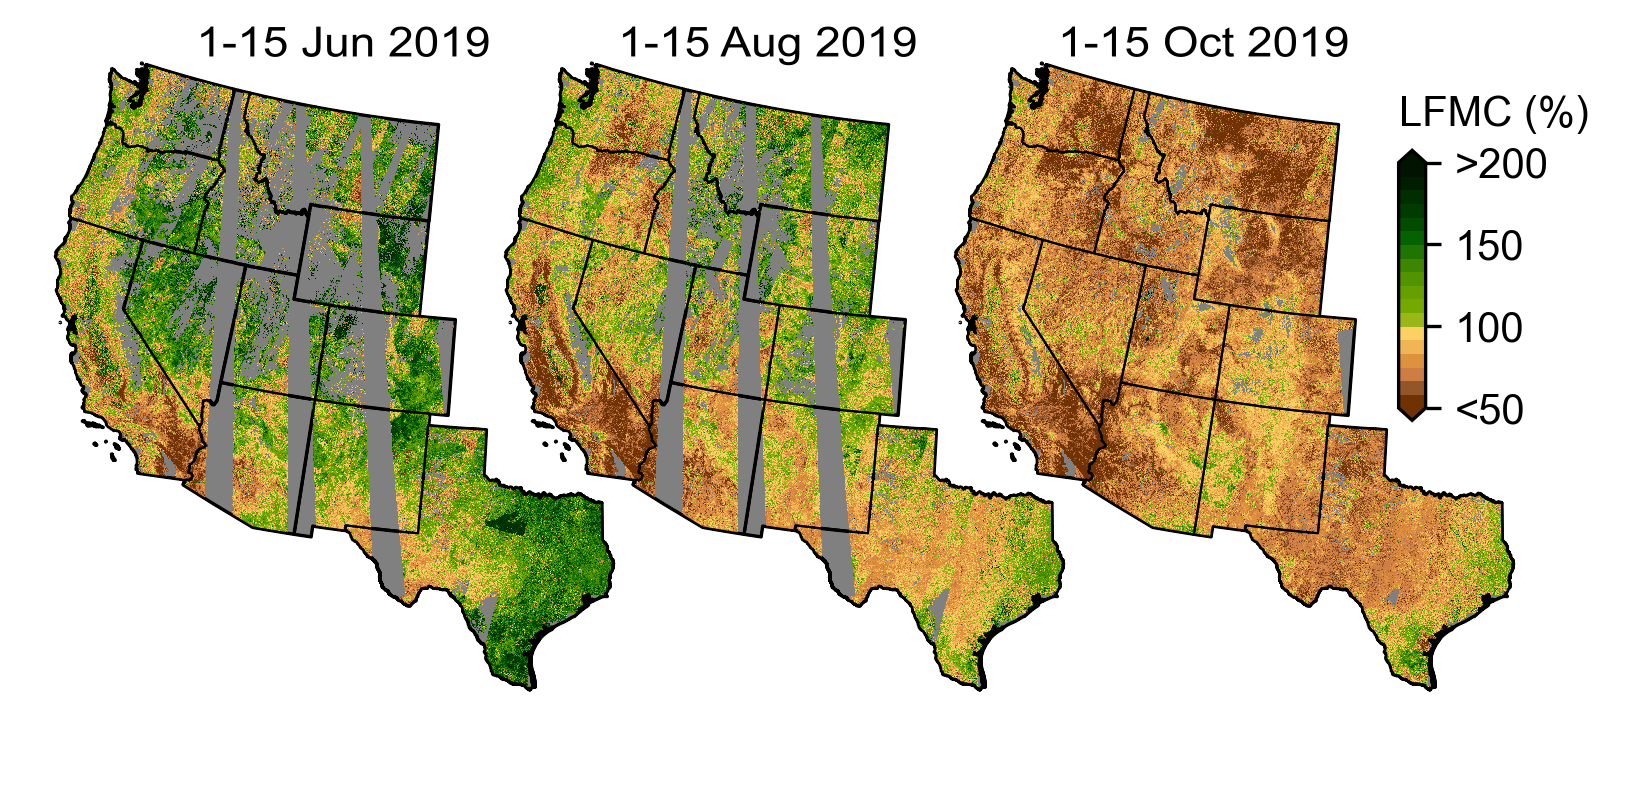 Maps showing forest dryness in western USA